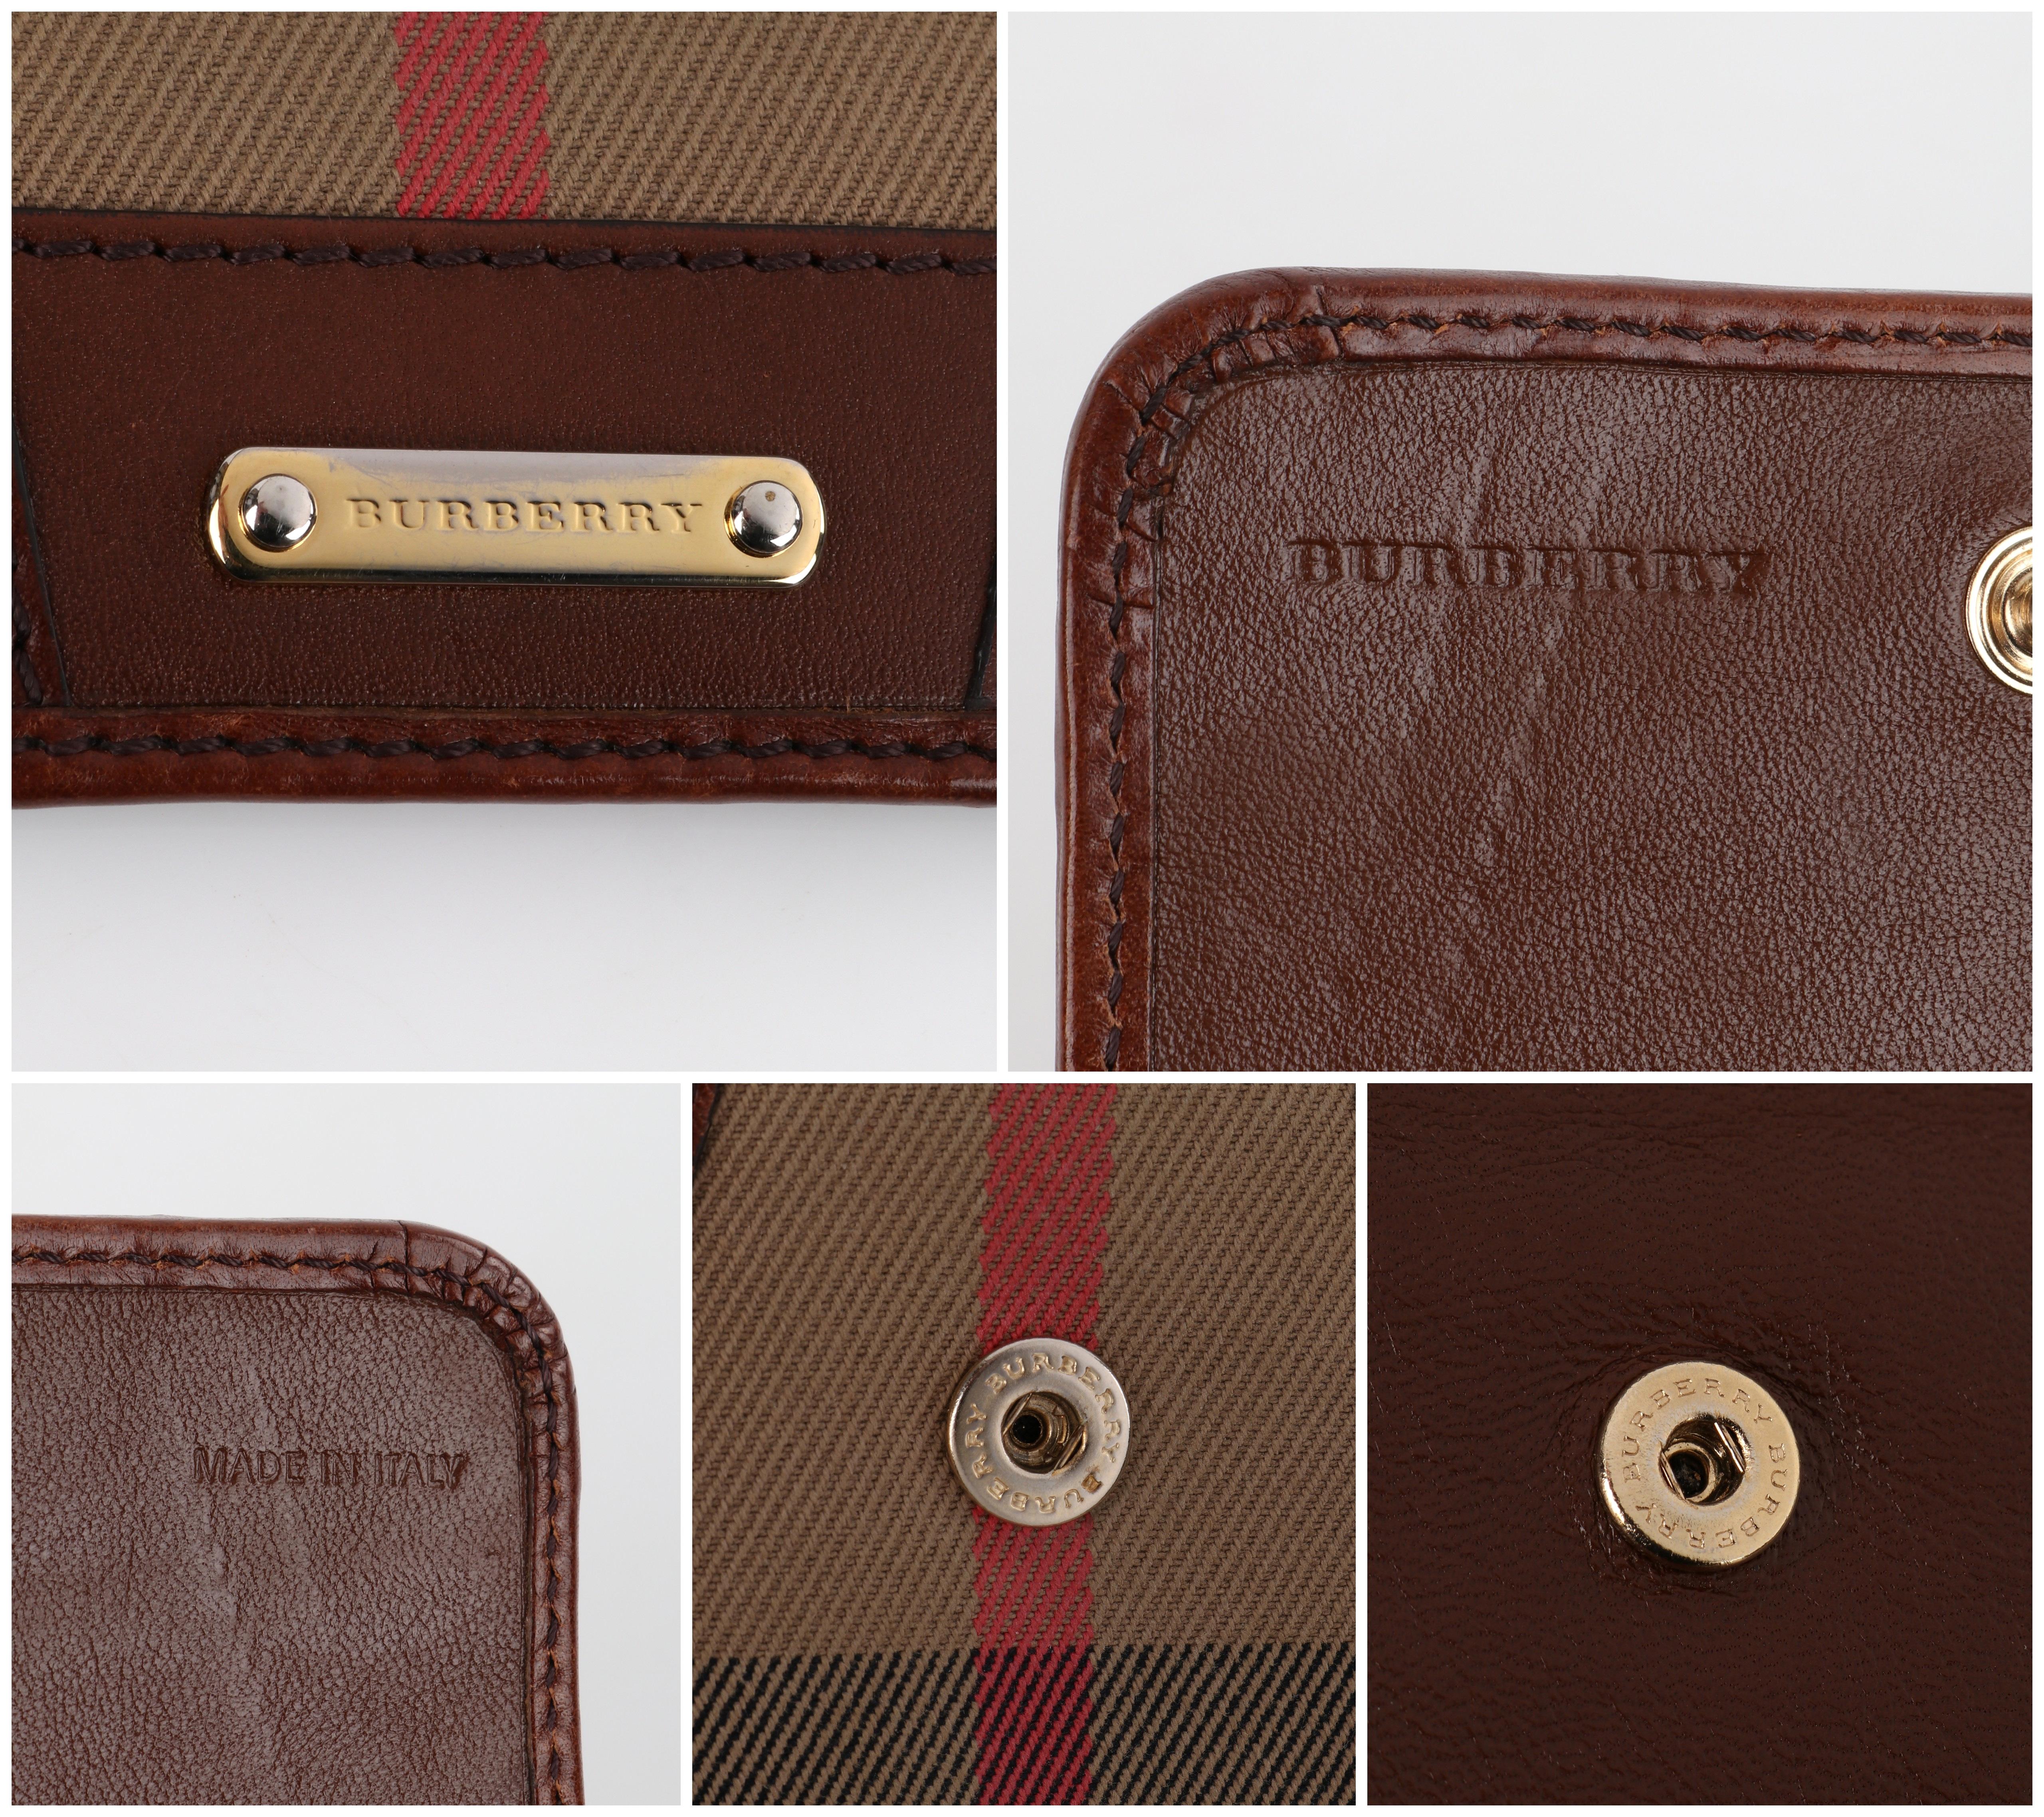 BURBERRY Nova Check Tartan Leather Trifold Square Compact Wallet 3